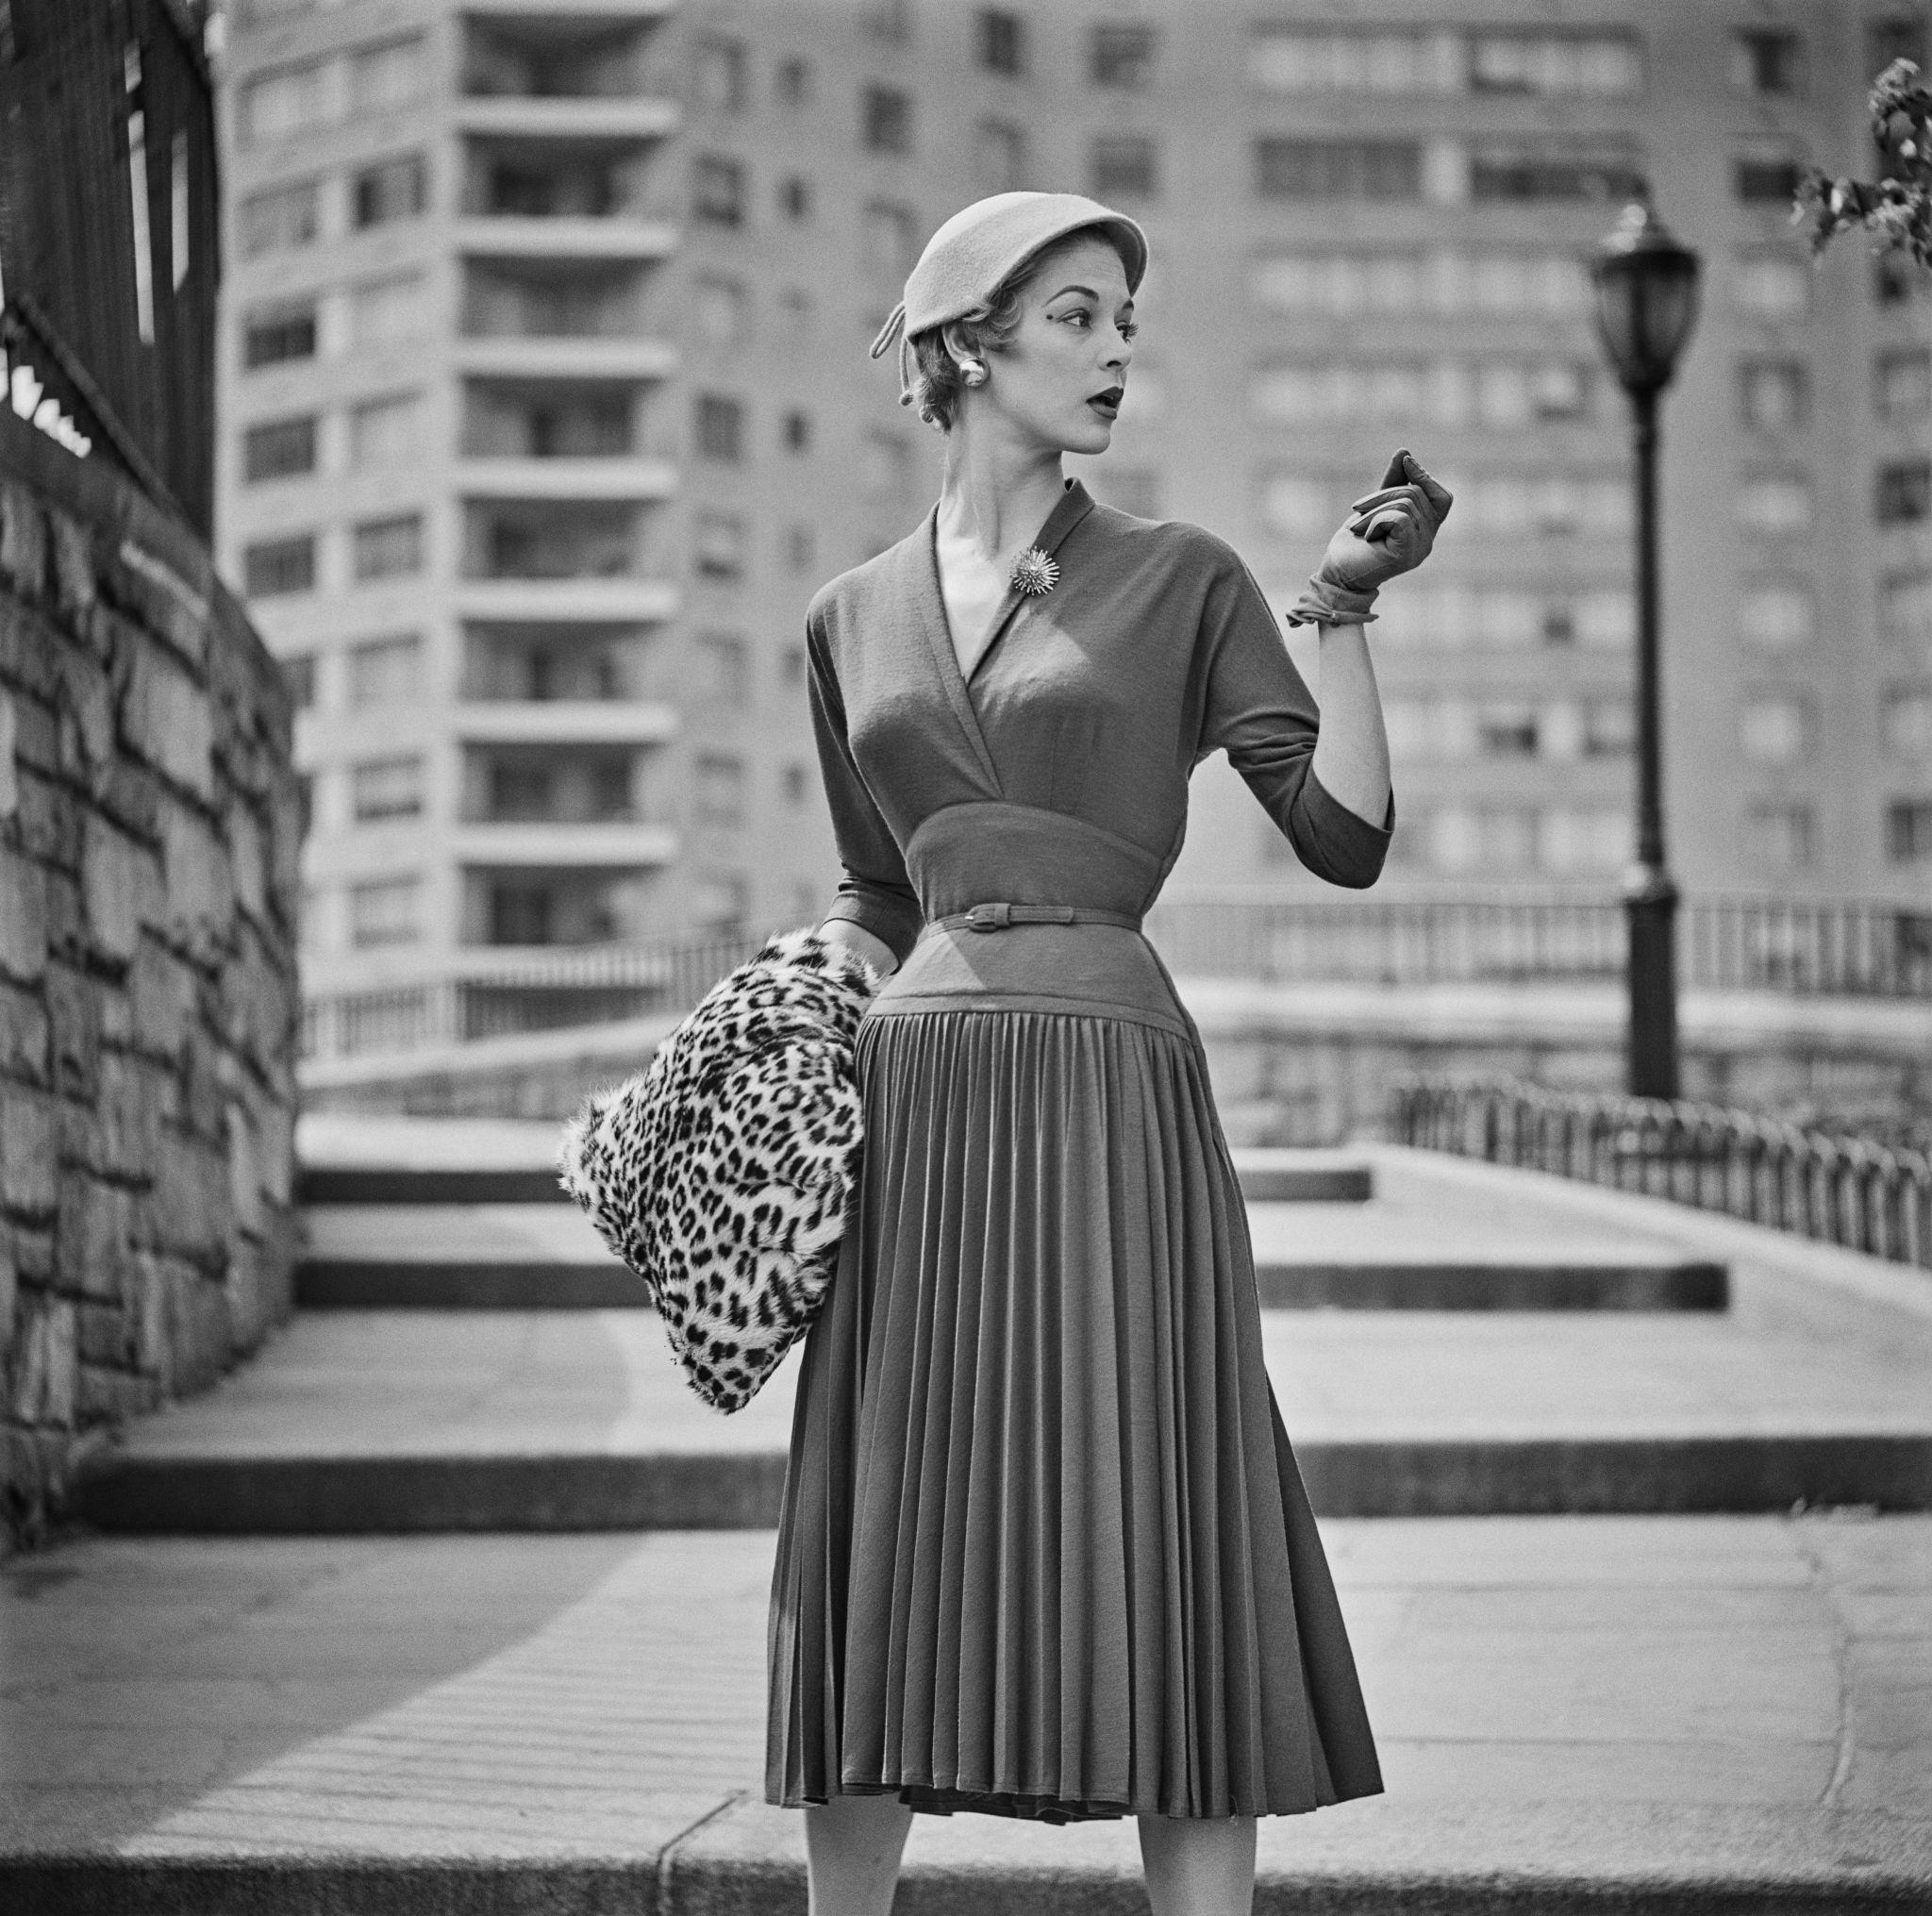 Slim Aarons Black and White Photograph - Jean Patchett For Saks Fifth Avenue